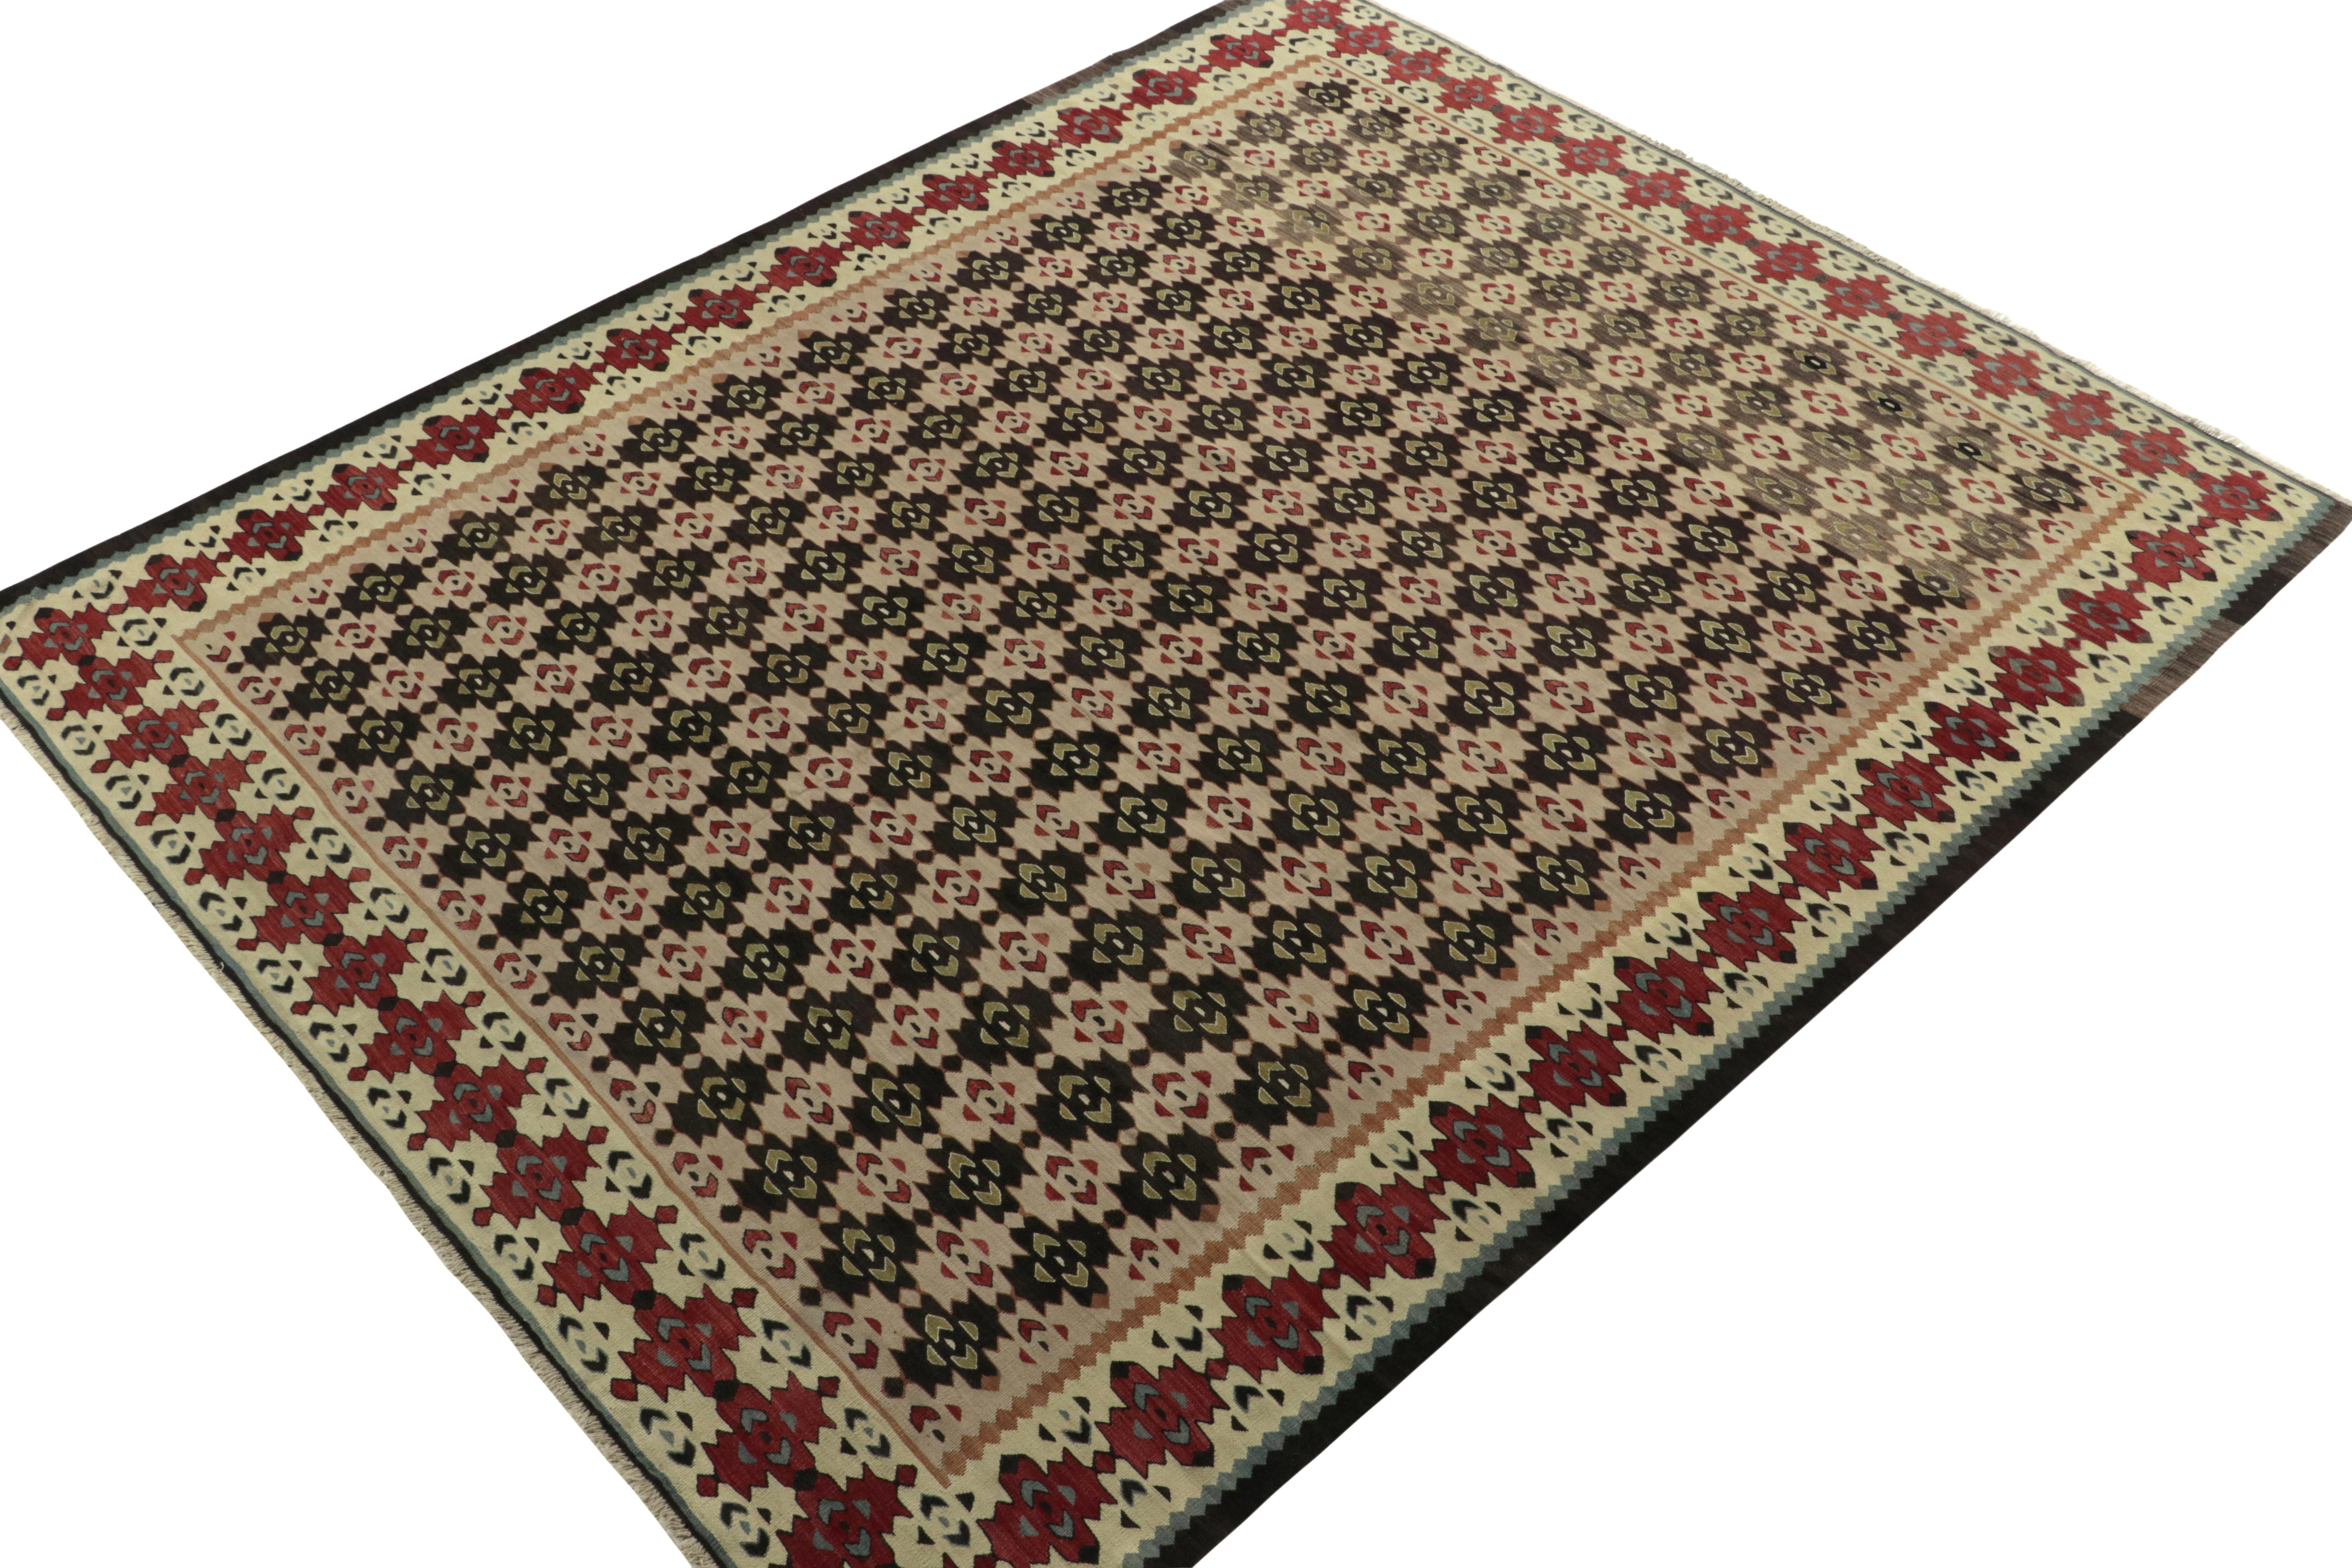 Handwoven in fine wool, an 8x10 antique kilim rug from Turkey, now joining our coveted tribal collection. 

Carrying a folk art appeal, the 1920s piece reflects a subtle Macedonian sensibility in design with traditional motifs adorning field &